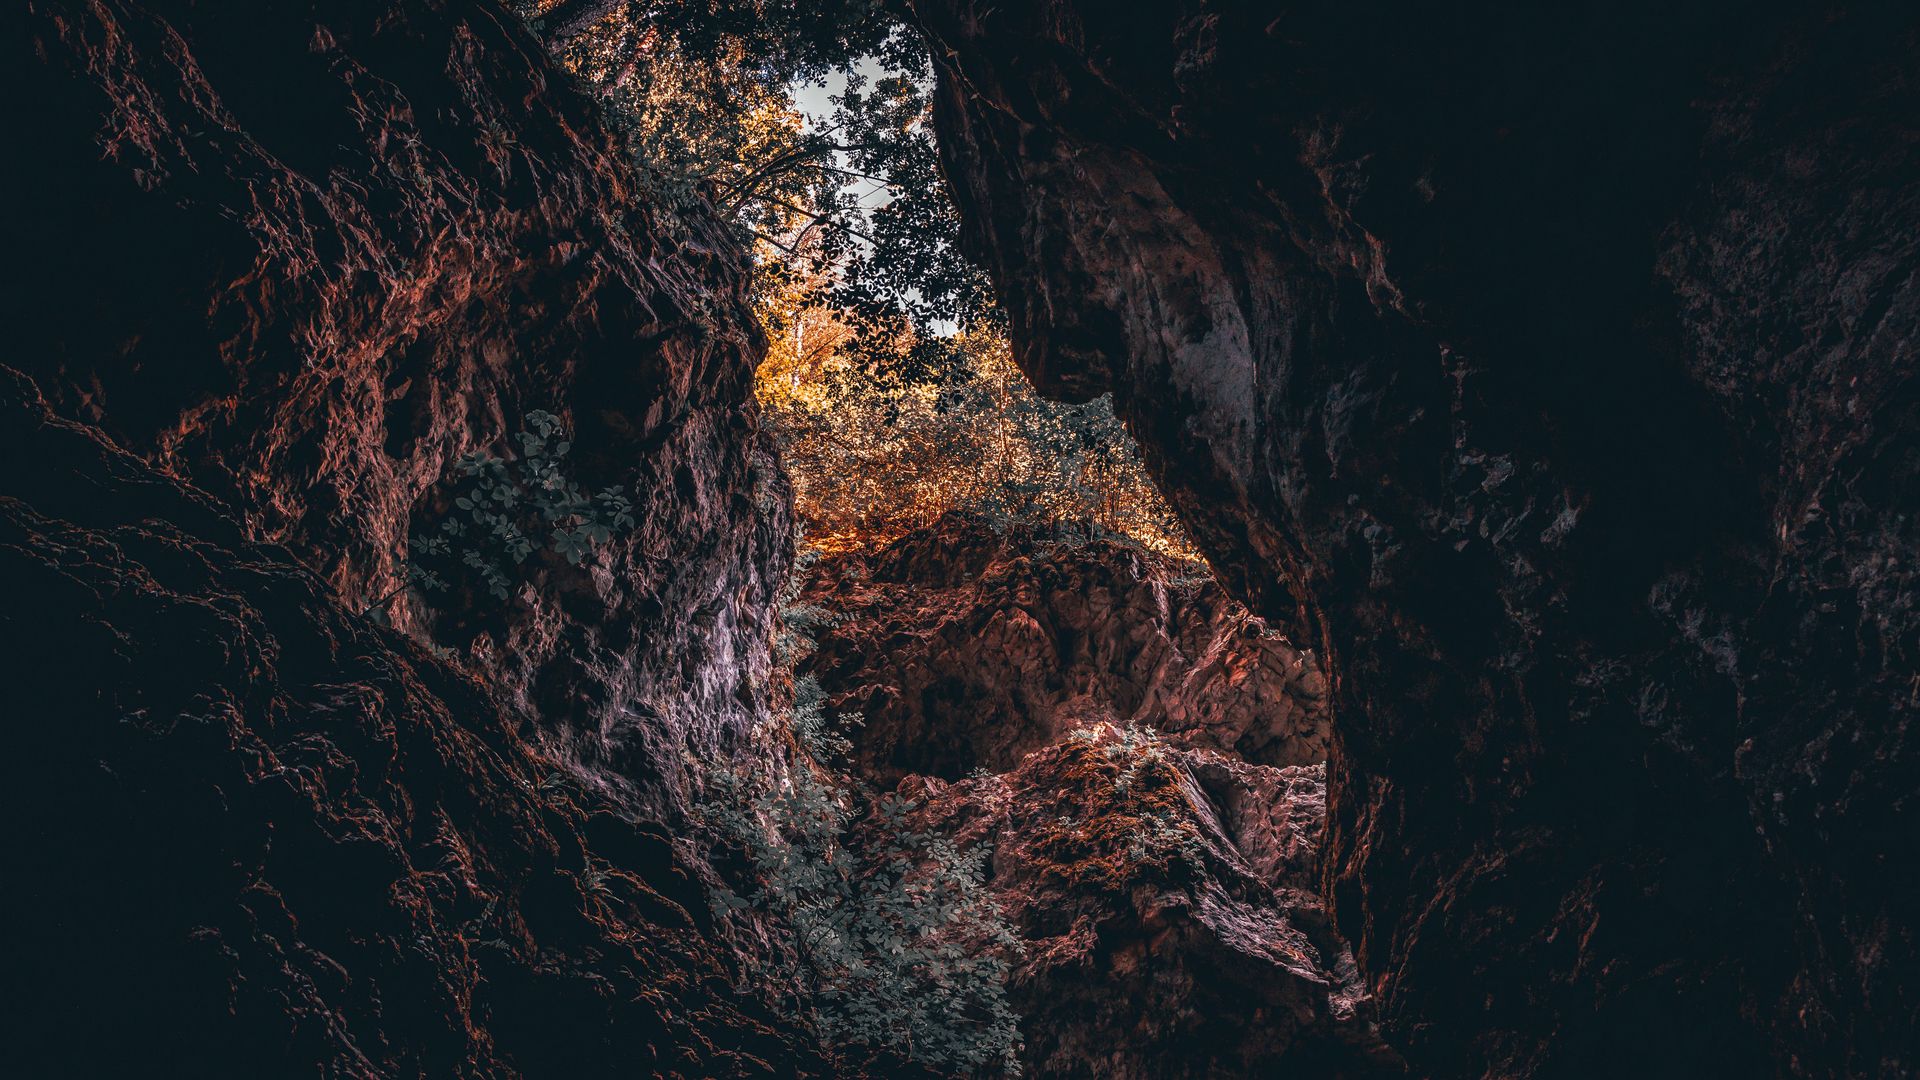 Download wallpaper 1920x1080 cave, rocks, gorge, mountains, nature full